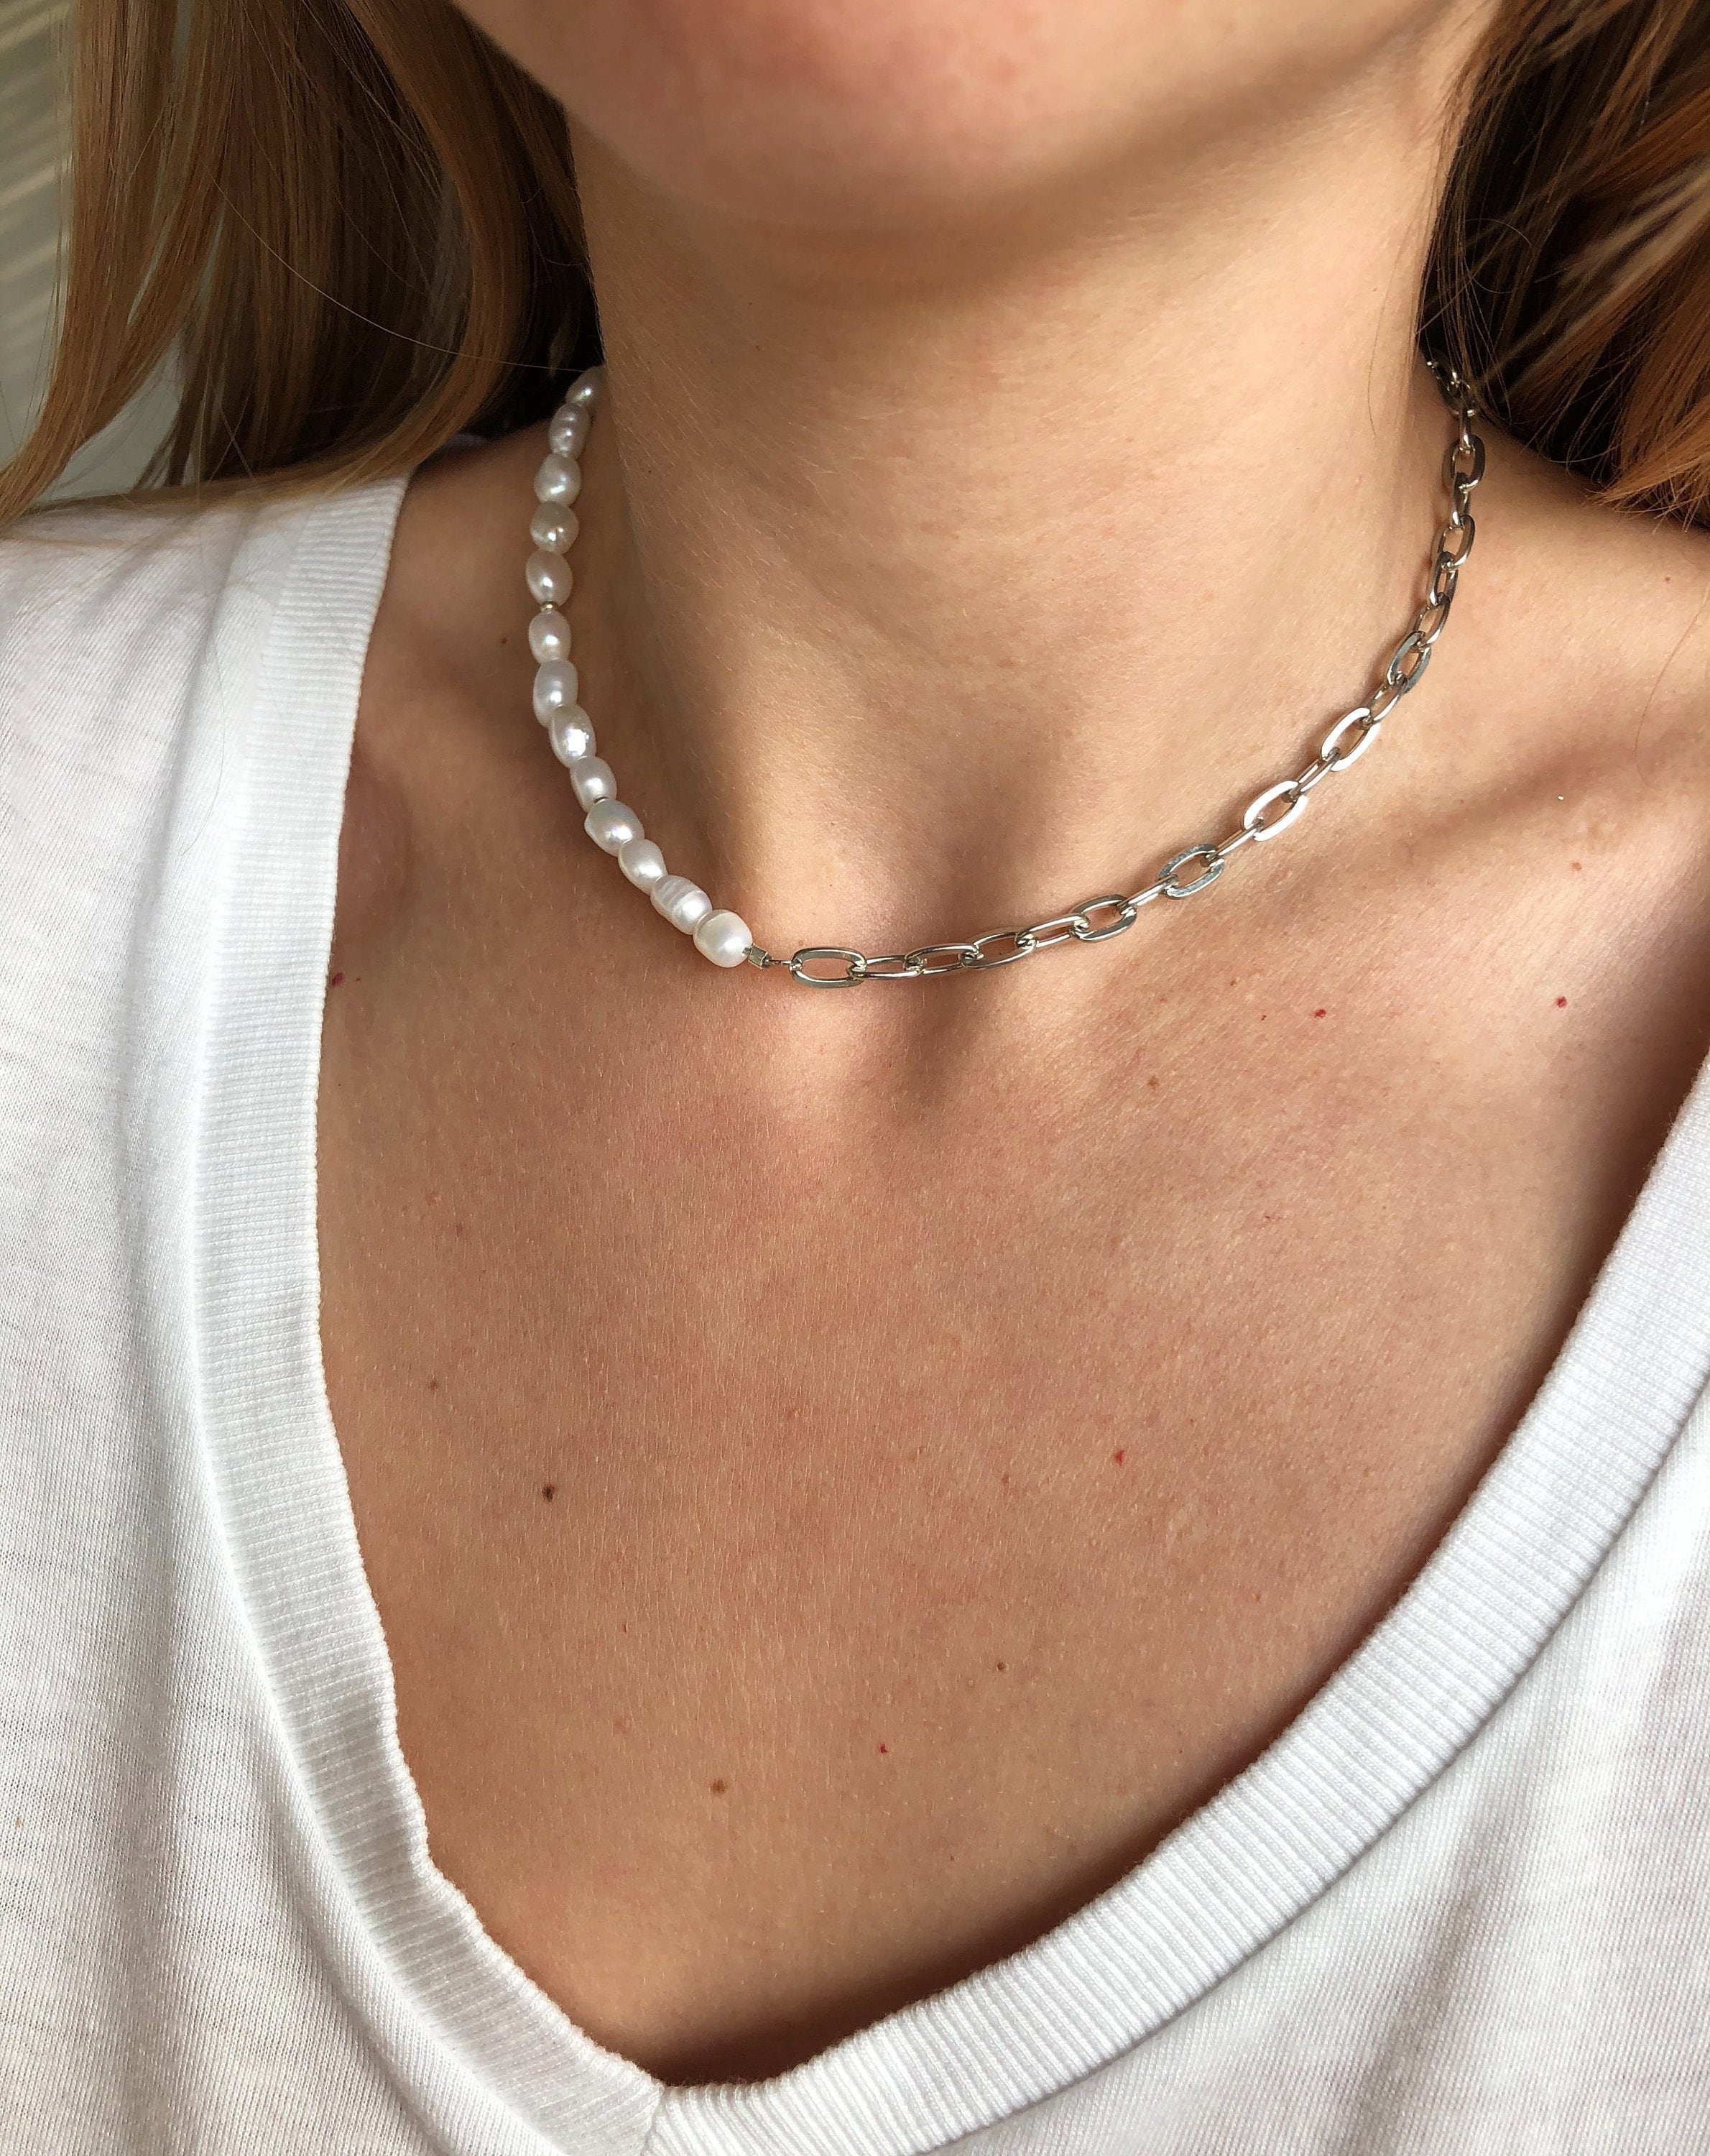 Buy Half Pearl Chain Online In India - Etsy India